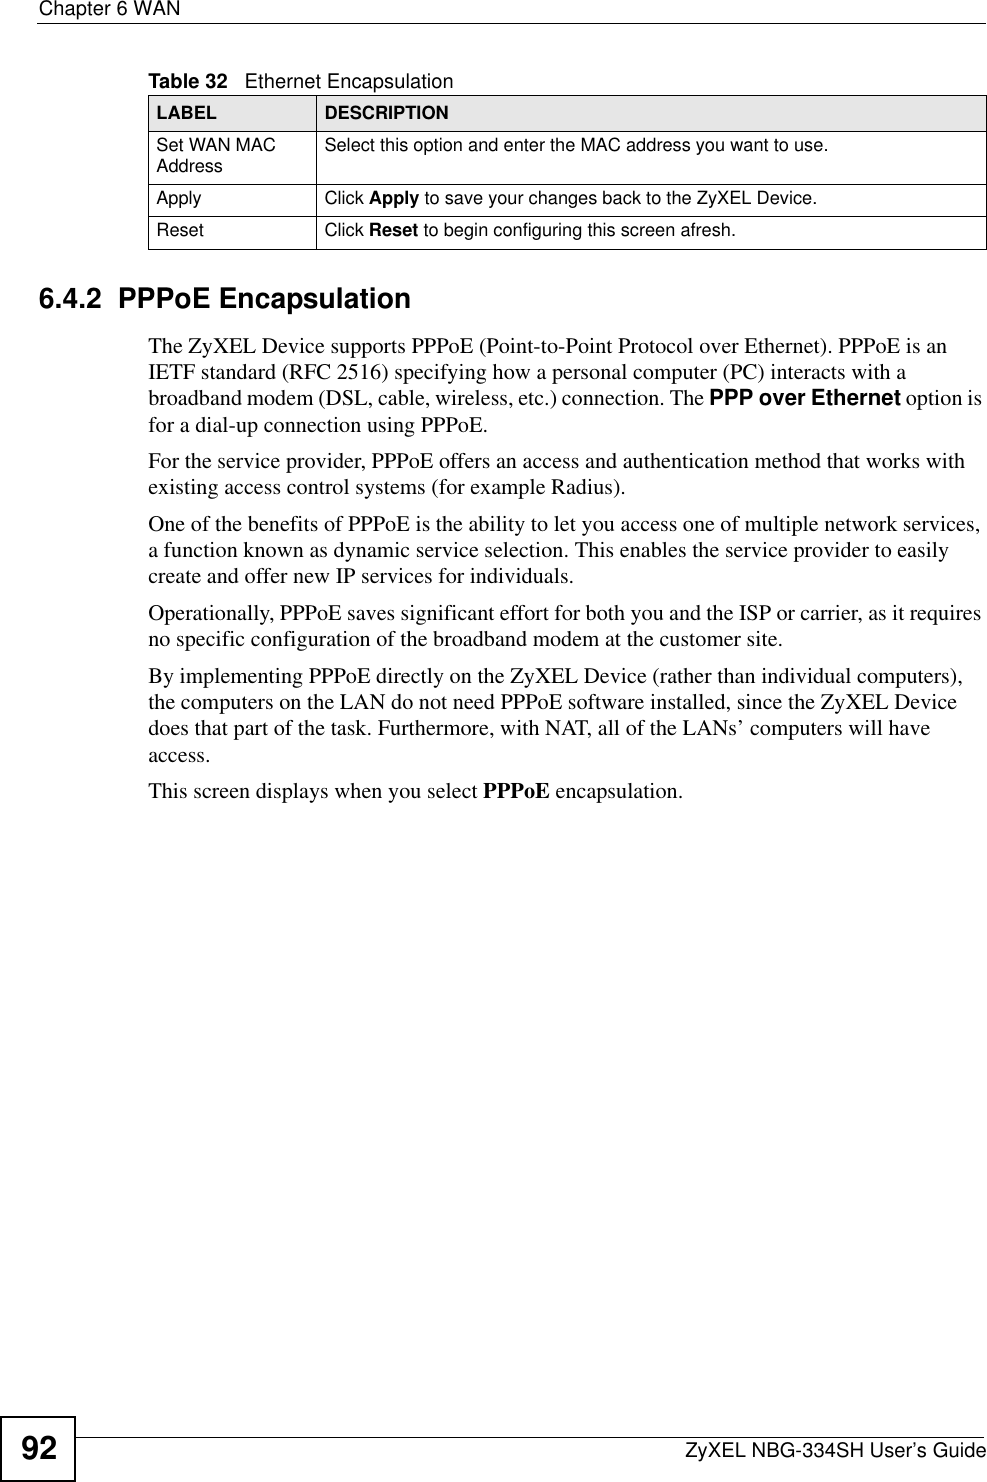 Chapter 6 WANZyXEL NBG-334SH User’s Guide926.4.2  PPPoE EncapsulationThe ZyXEL Device supports PPPoE (Point-to-Point Protocol over Ethernet). PPPoE is an IETF standard (RFC 2516) specifying how a personal computer (PC) interacts with a broadband modem (DSL, cable, wireless, etc.) connection. The PPP over Ethernet option is for a dial-up connection using PPPoE.For the service provider, PPPoE offers an access and authentication method that works with existing access control systems (for example Radius).One of the benefits of PPPoE is the ability to let you access one of multiple network services, a function known as dynamic service selection. This enables the service provider to easily create and offer new IP services for individuals.Operationally, PPPoE saves significant effort for both you and the ISP or carrier, as it requires no specific configuration of the broadband modem at the customer site.By implementing PPPoE directly on the ZyXEL Device (rather than individual computers), the computers on the LAN do not need PPPoE software installed, since the ZyXEL Device does that part of the task. Furthermore, with NAT, all of the LANs’ computers will have access.This screen displays when you select PPPoE encapsulation.Set WAN MAC Address Select this option and enter the MAC address you want to use.Apply Click Apply to save your changes back to the ZyXEL Device.Reset Click Reset to begin configuring this screen afresh.Table 32   Ethernet EncapsulationLABEL DESCRIPTION